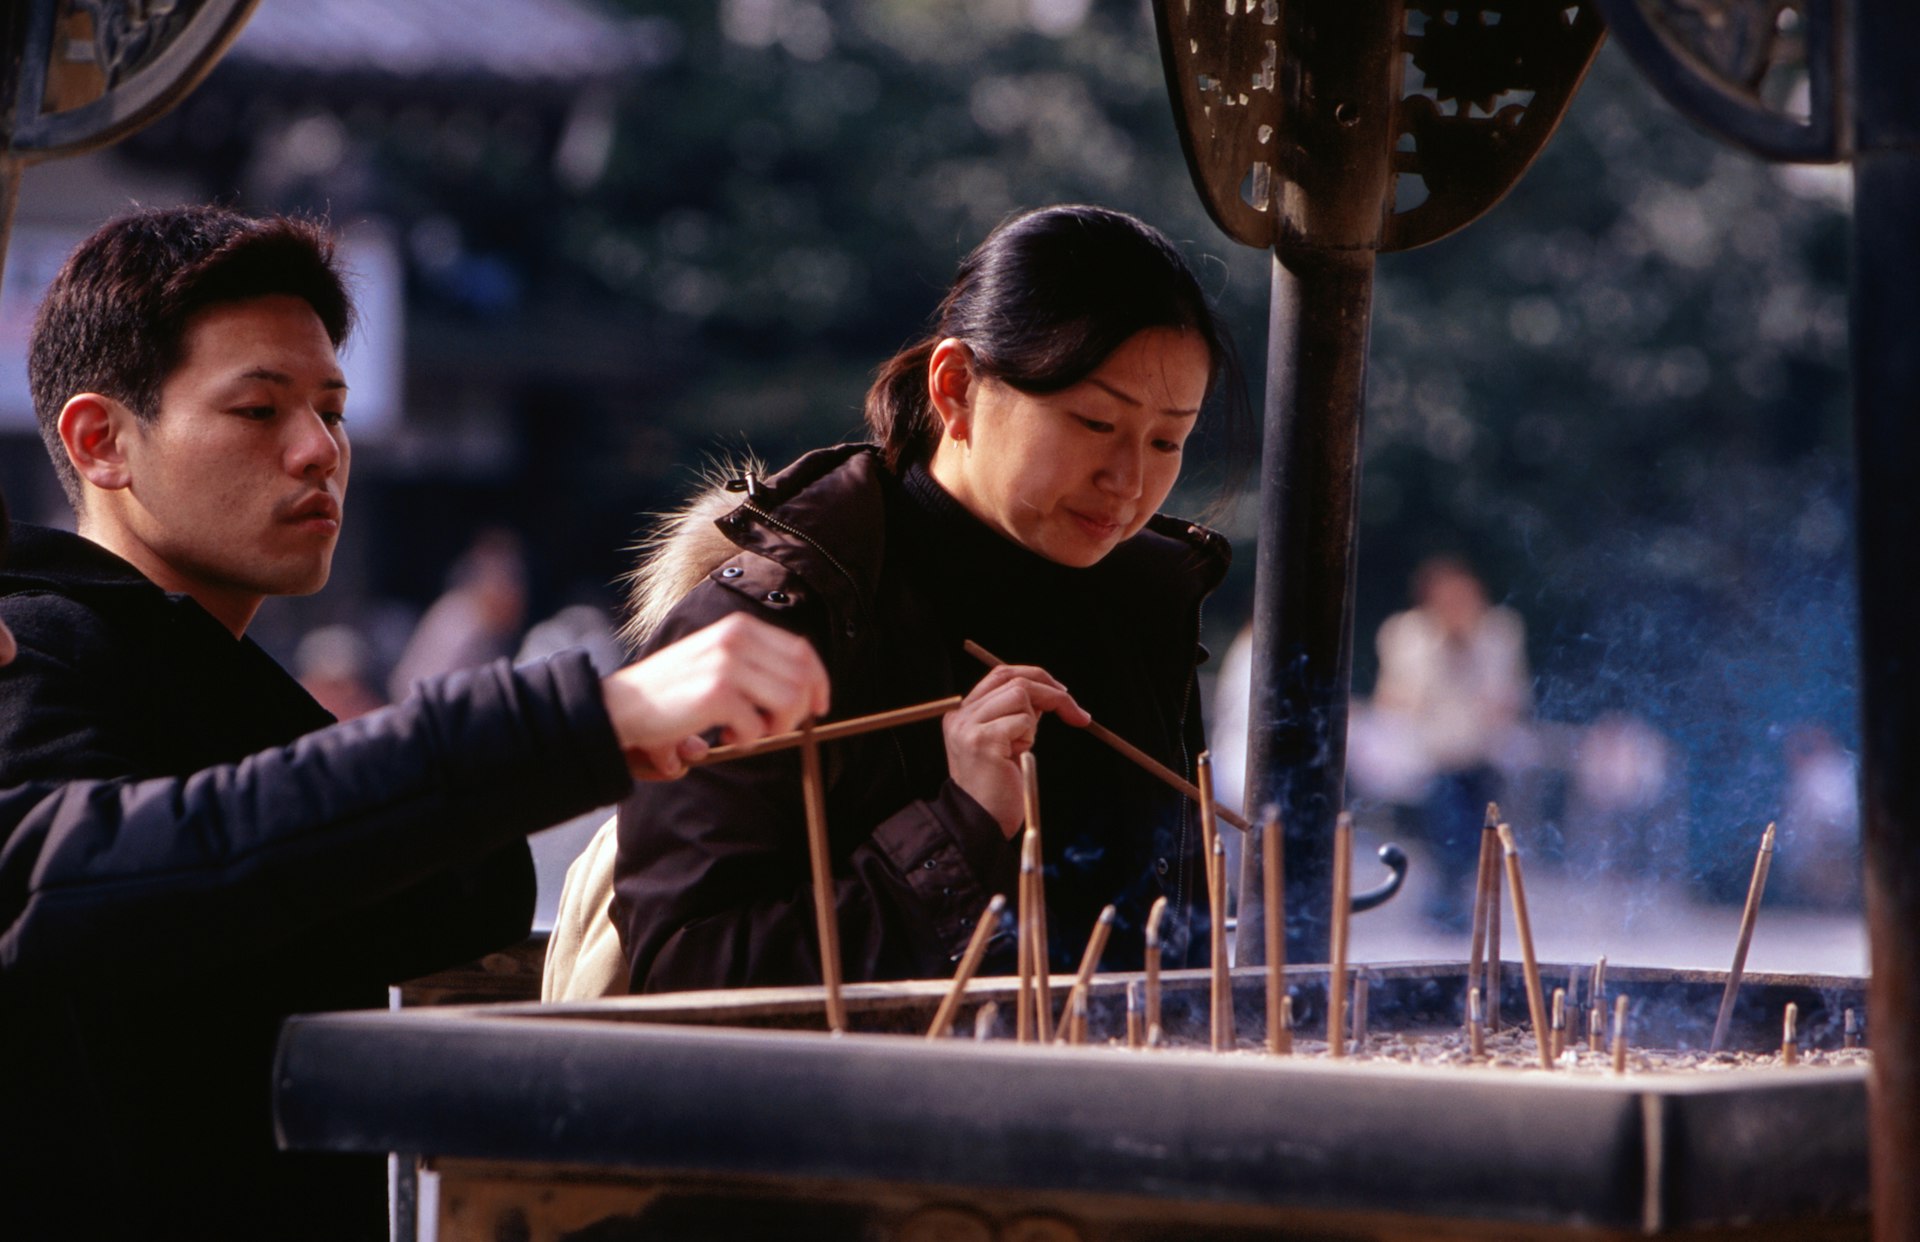 Devotees light incense at Chion-in 